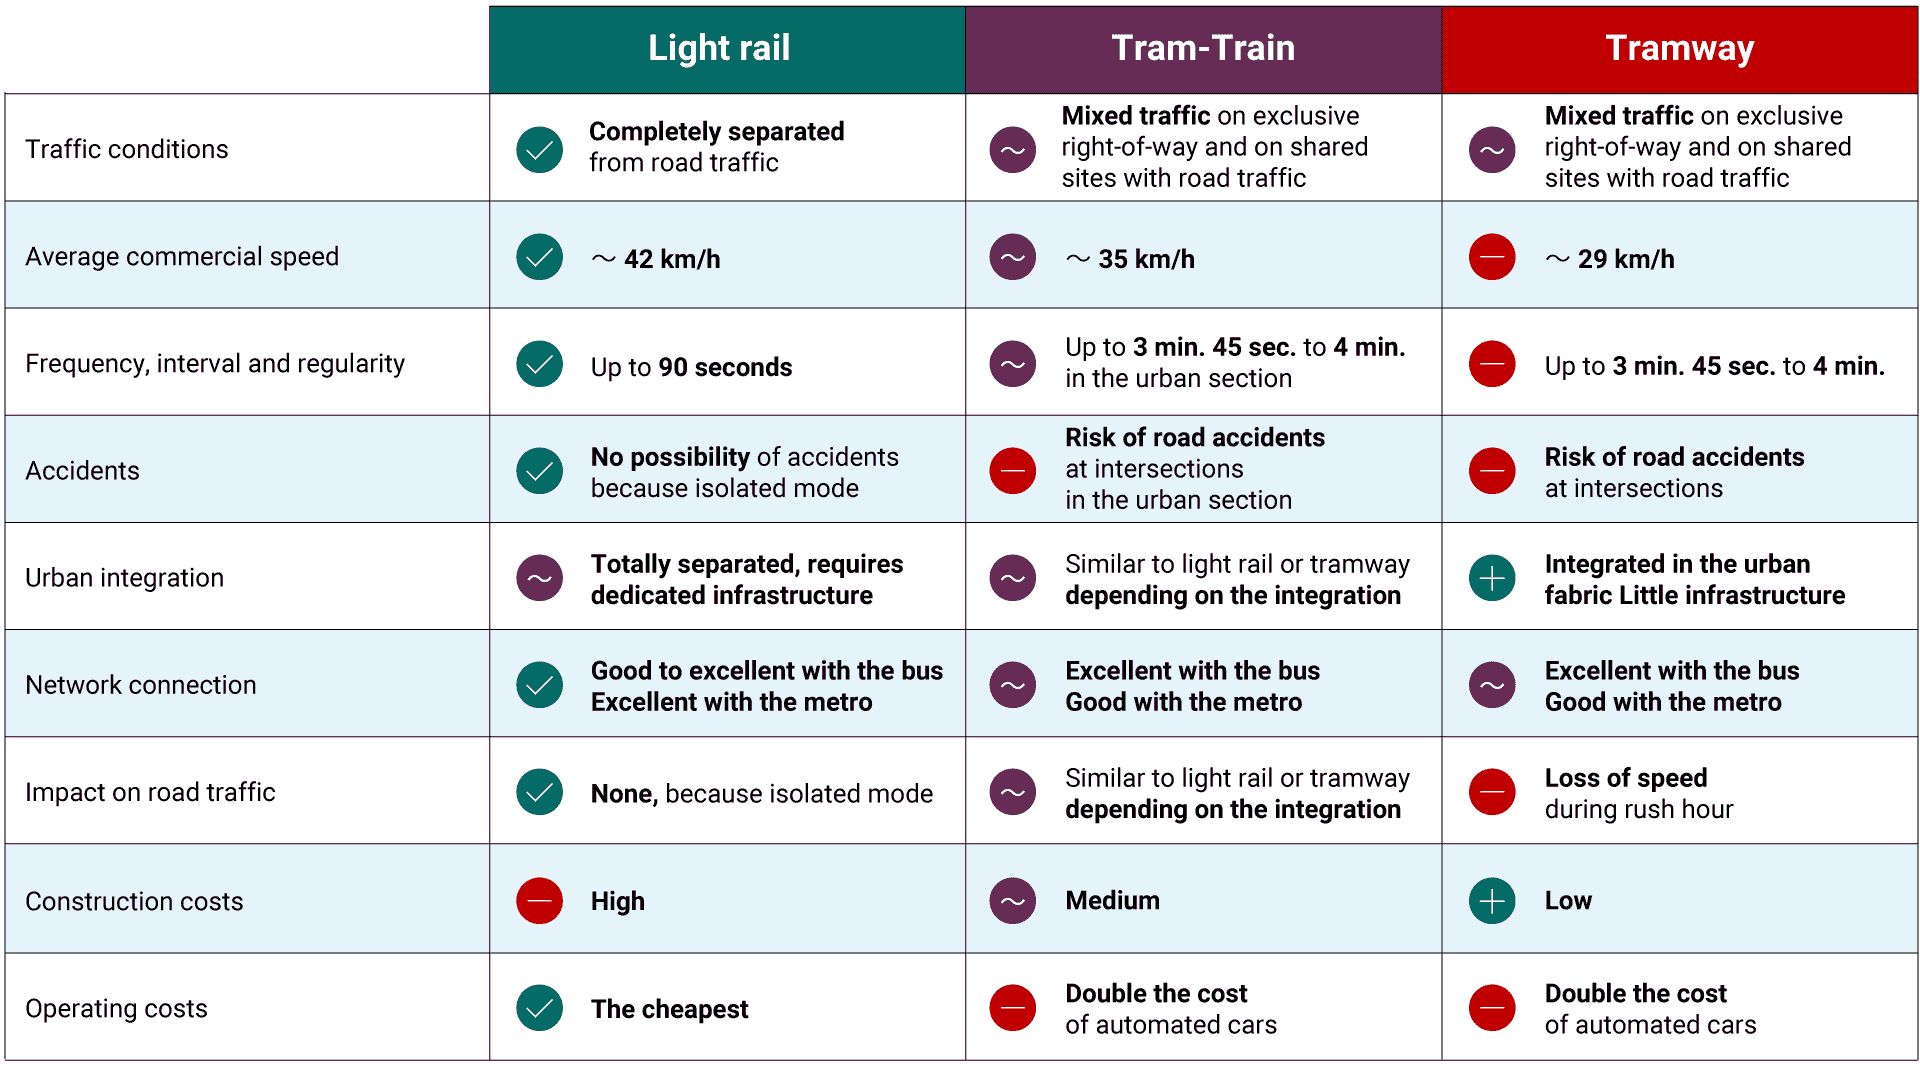 Comparison table of tramway, tram-train and light rail